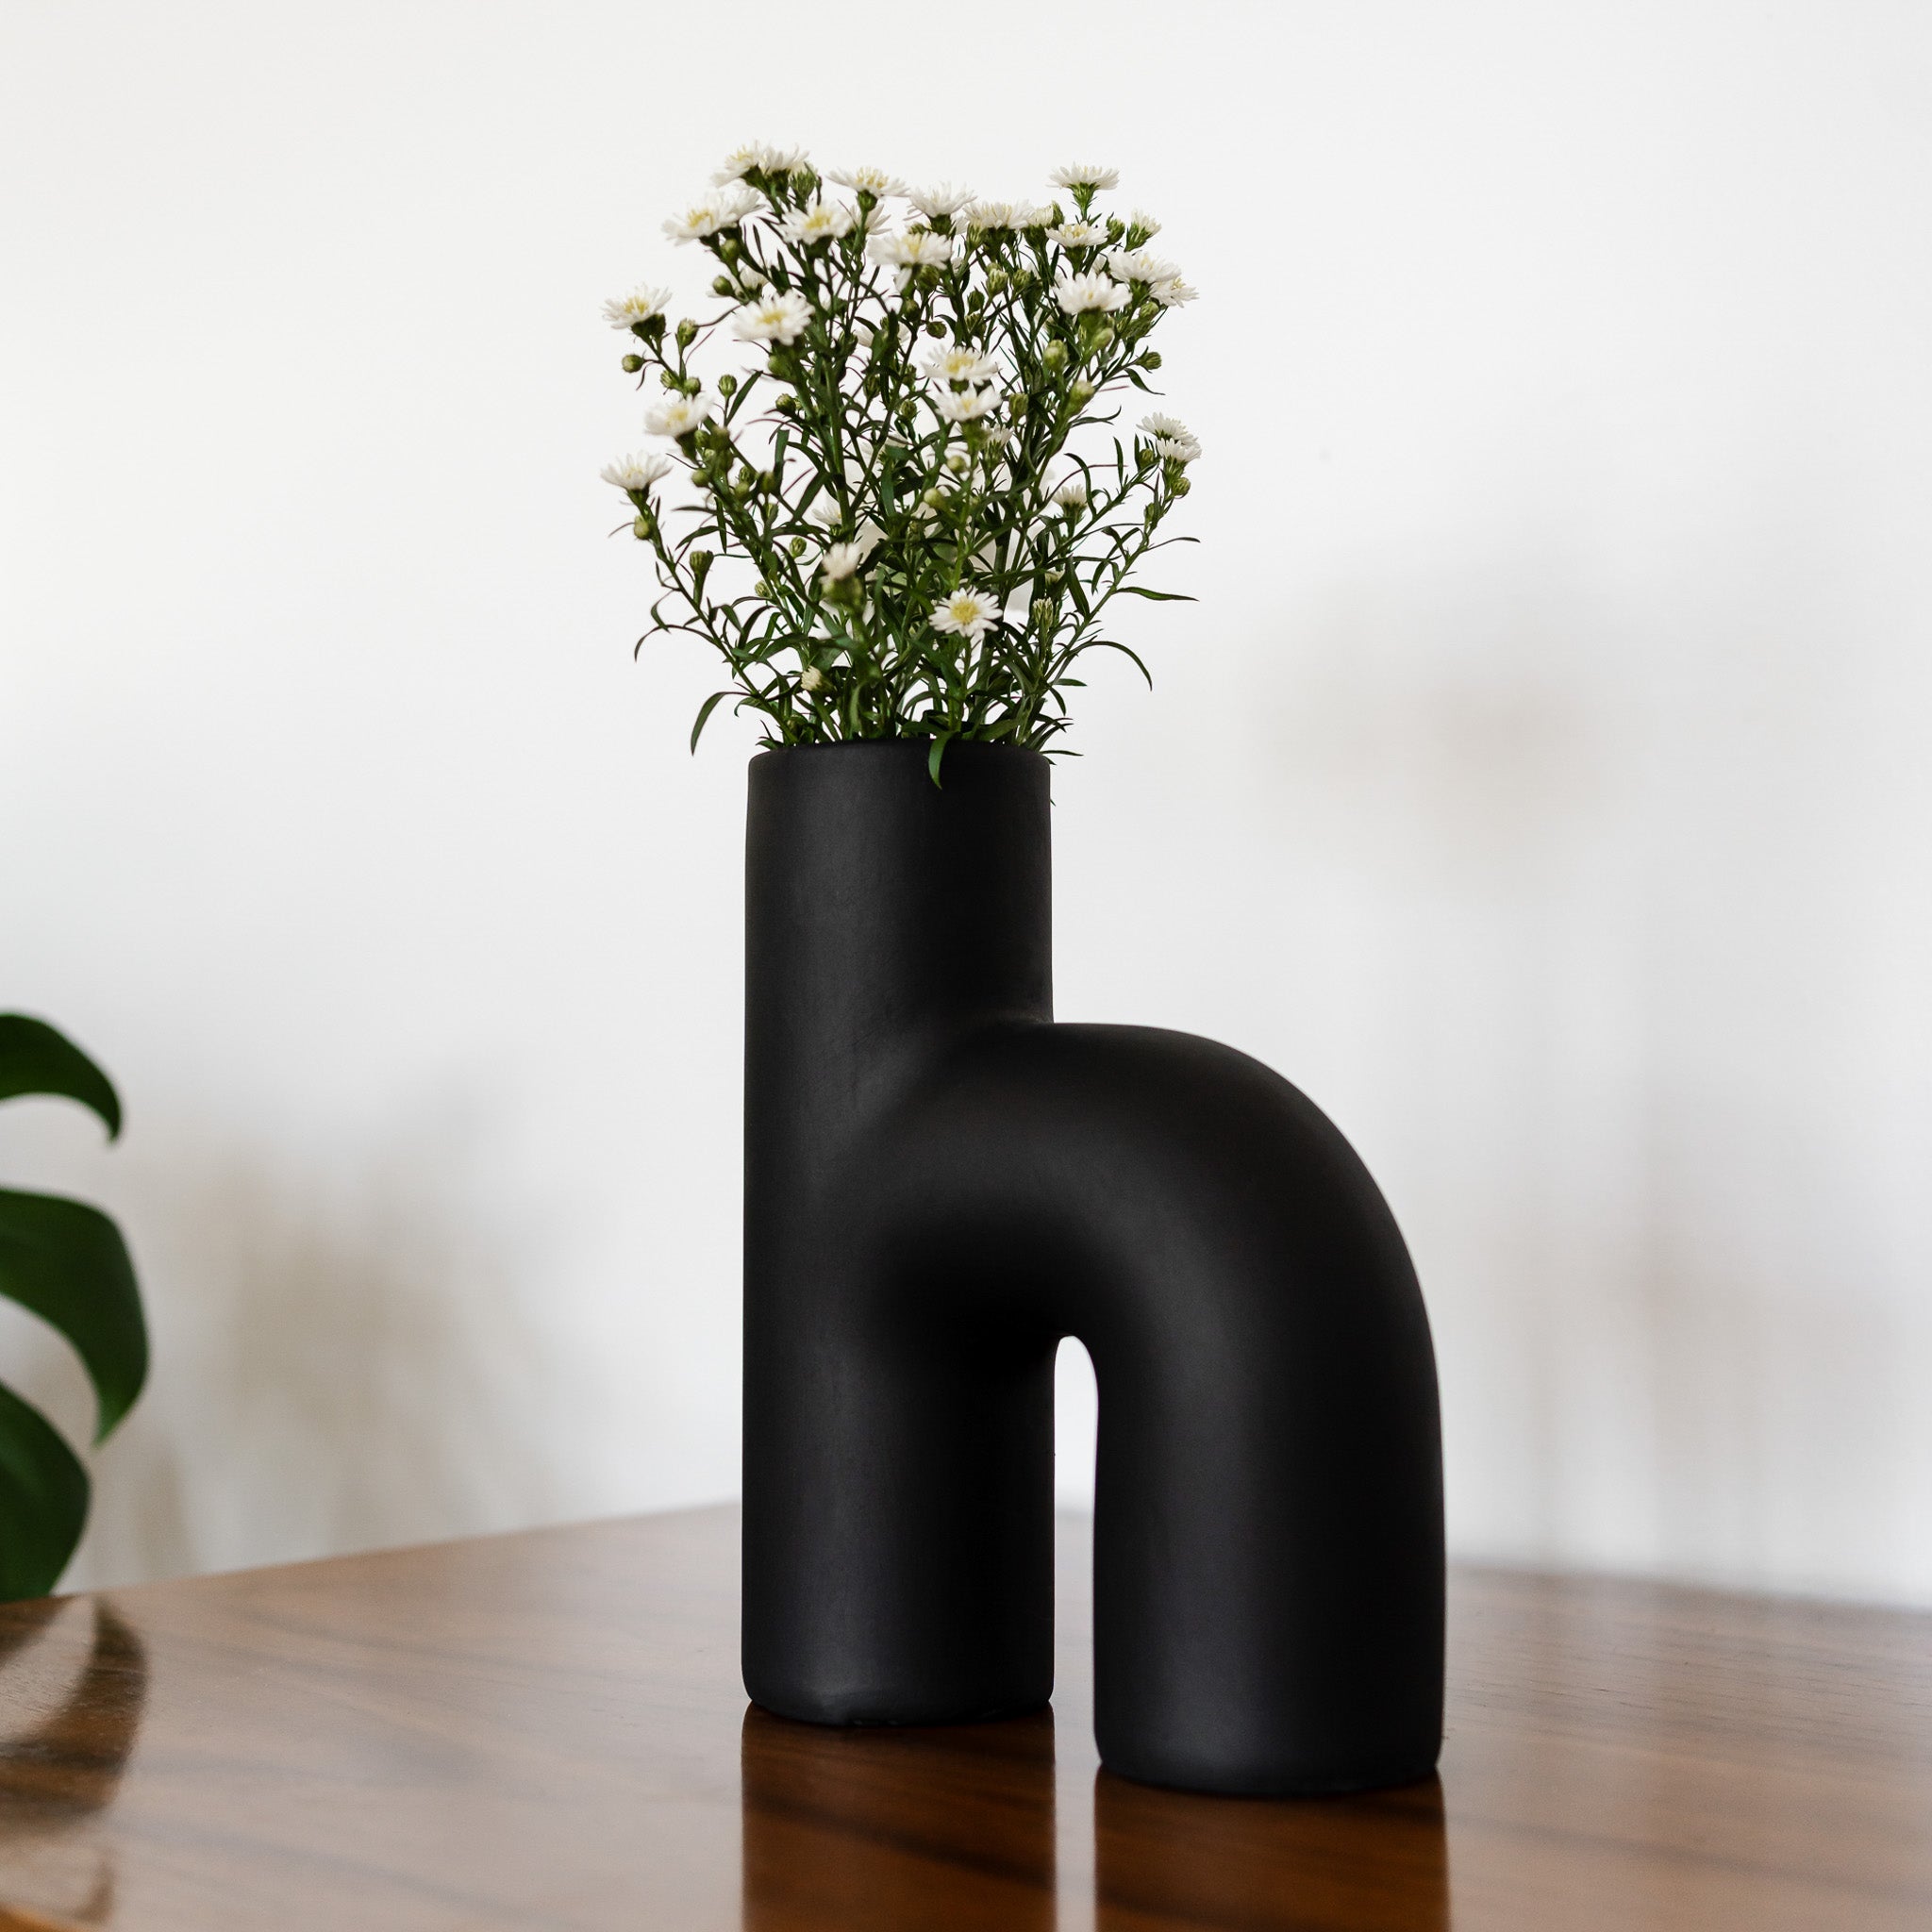 Lila Abstract Sculptural Decorative Modern Vase in Black in Decorative by Maven Lane